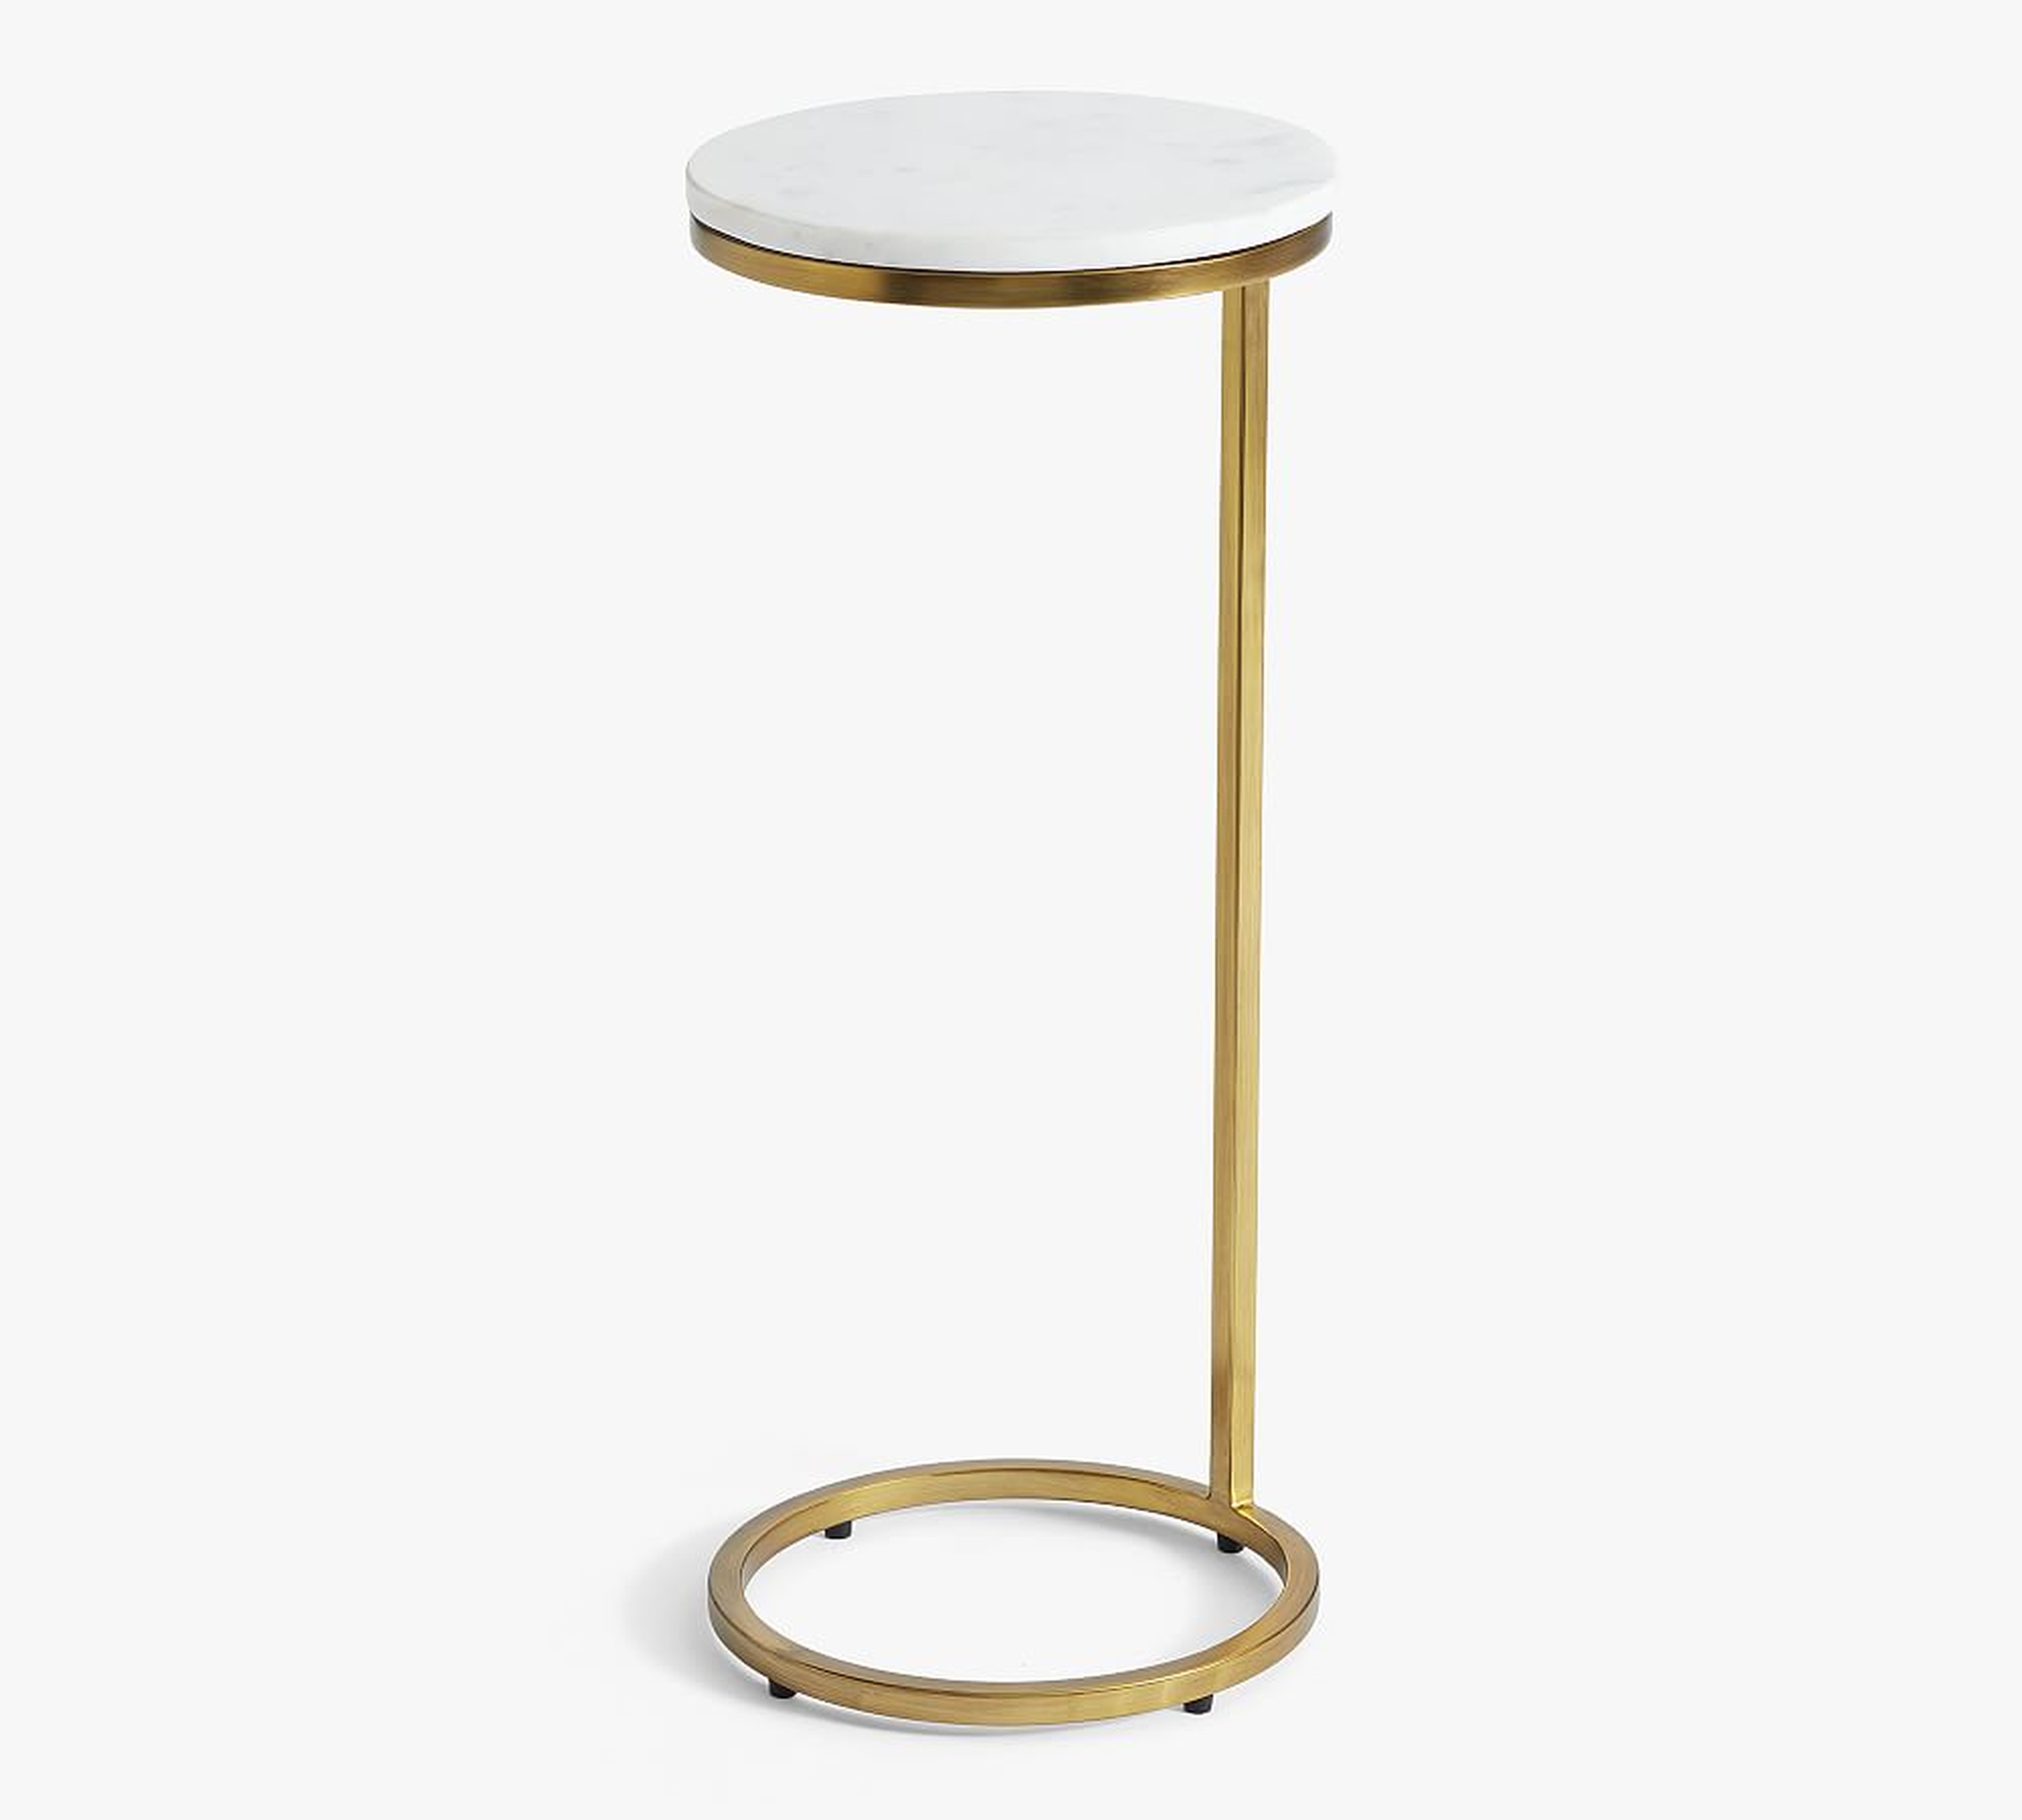 Delaney 10" Round Marble C-Table, Brass - Pottery Barn